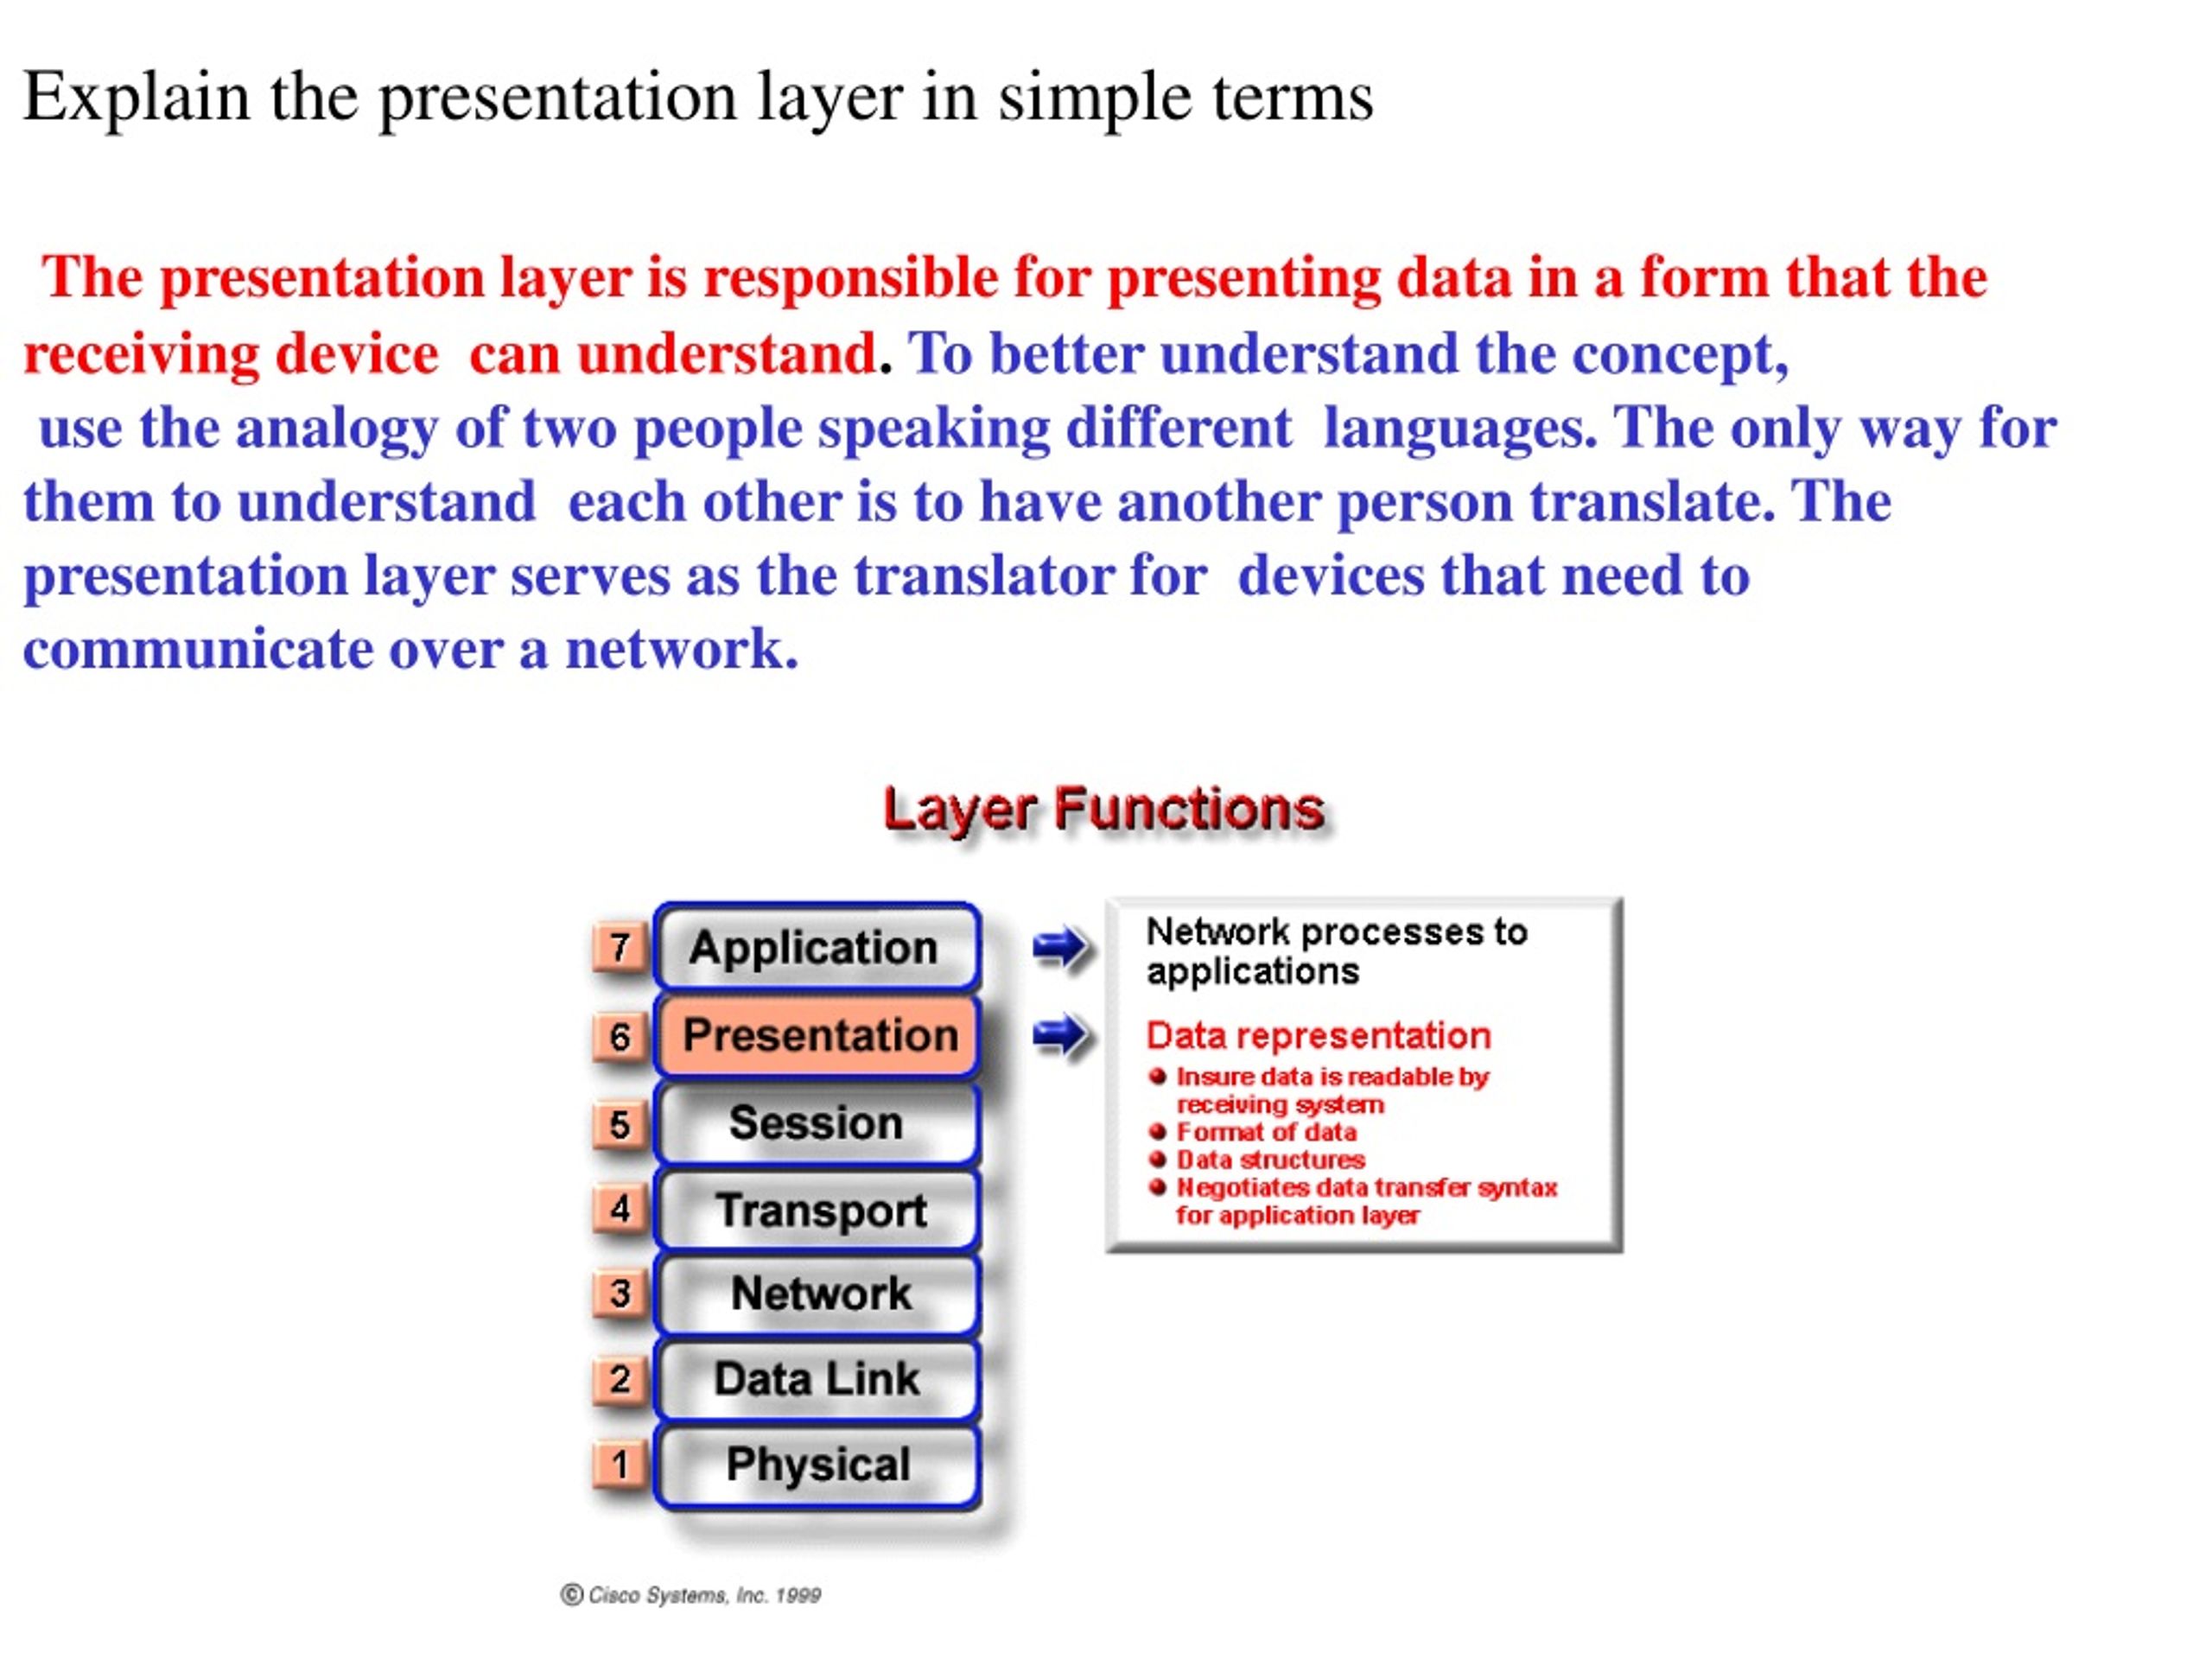 the presentation layer provides this (these) service(s)